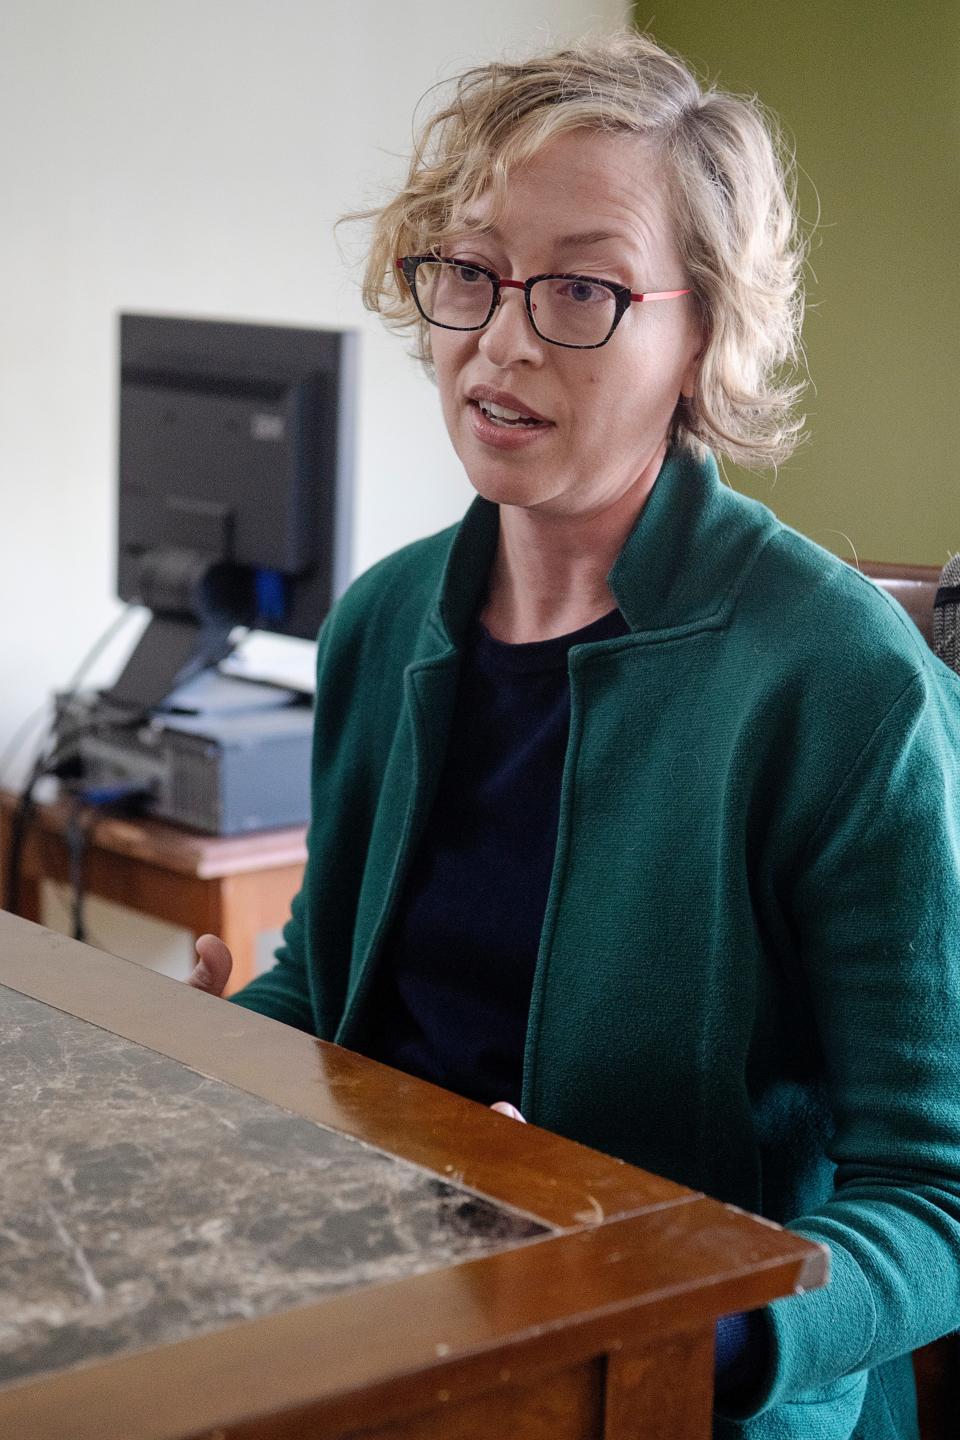 Nikki Reid, director of community and economic development discusses the closure of the emergency shelter at the Ramada Inn in East Asheville March 30, 2022.